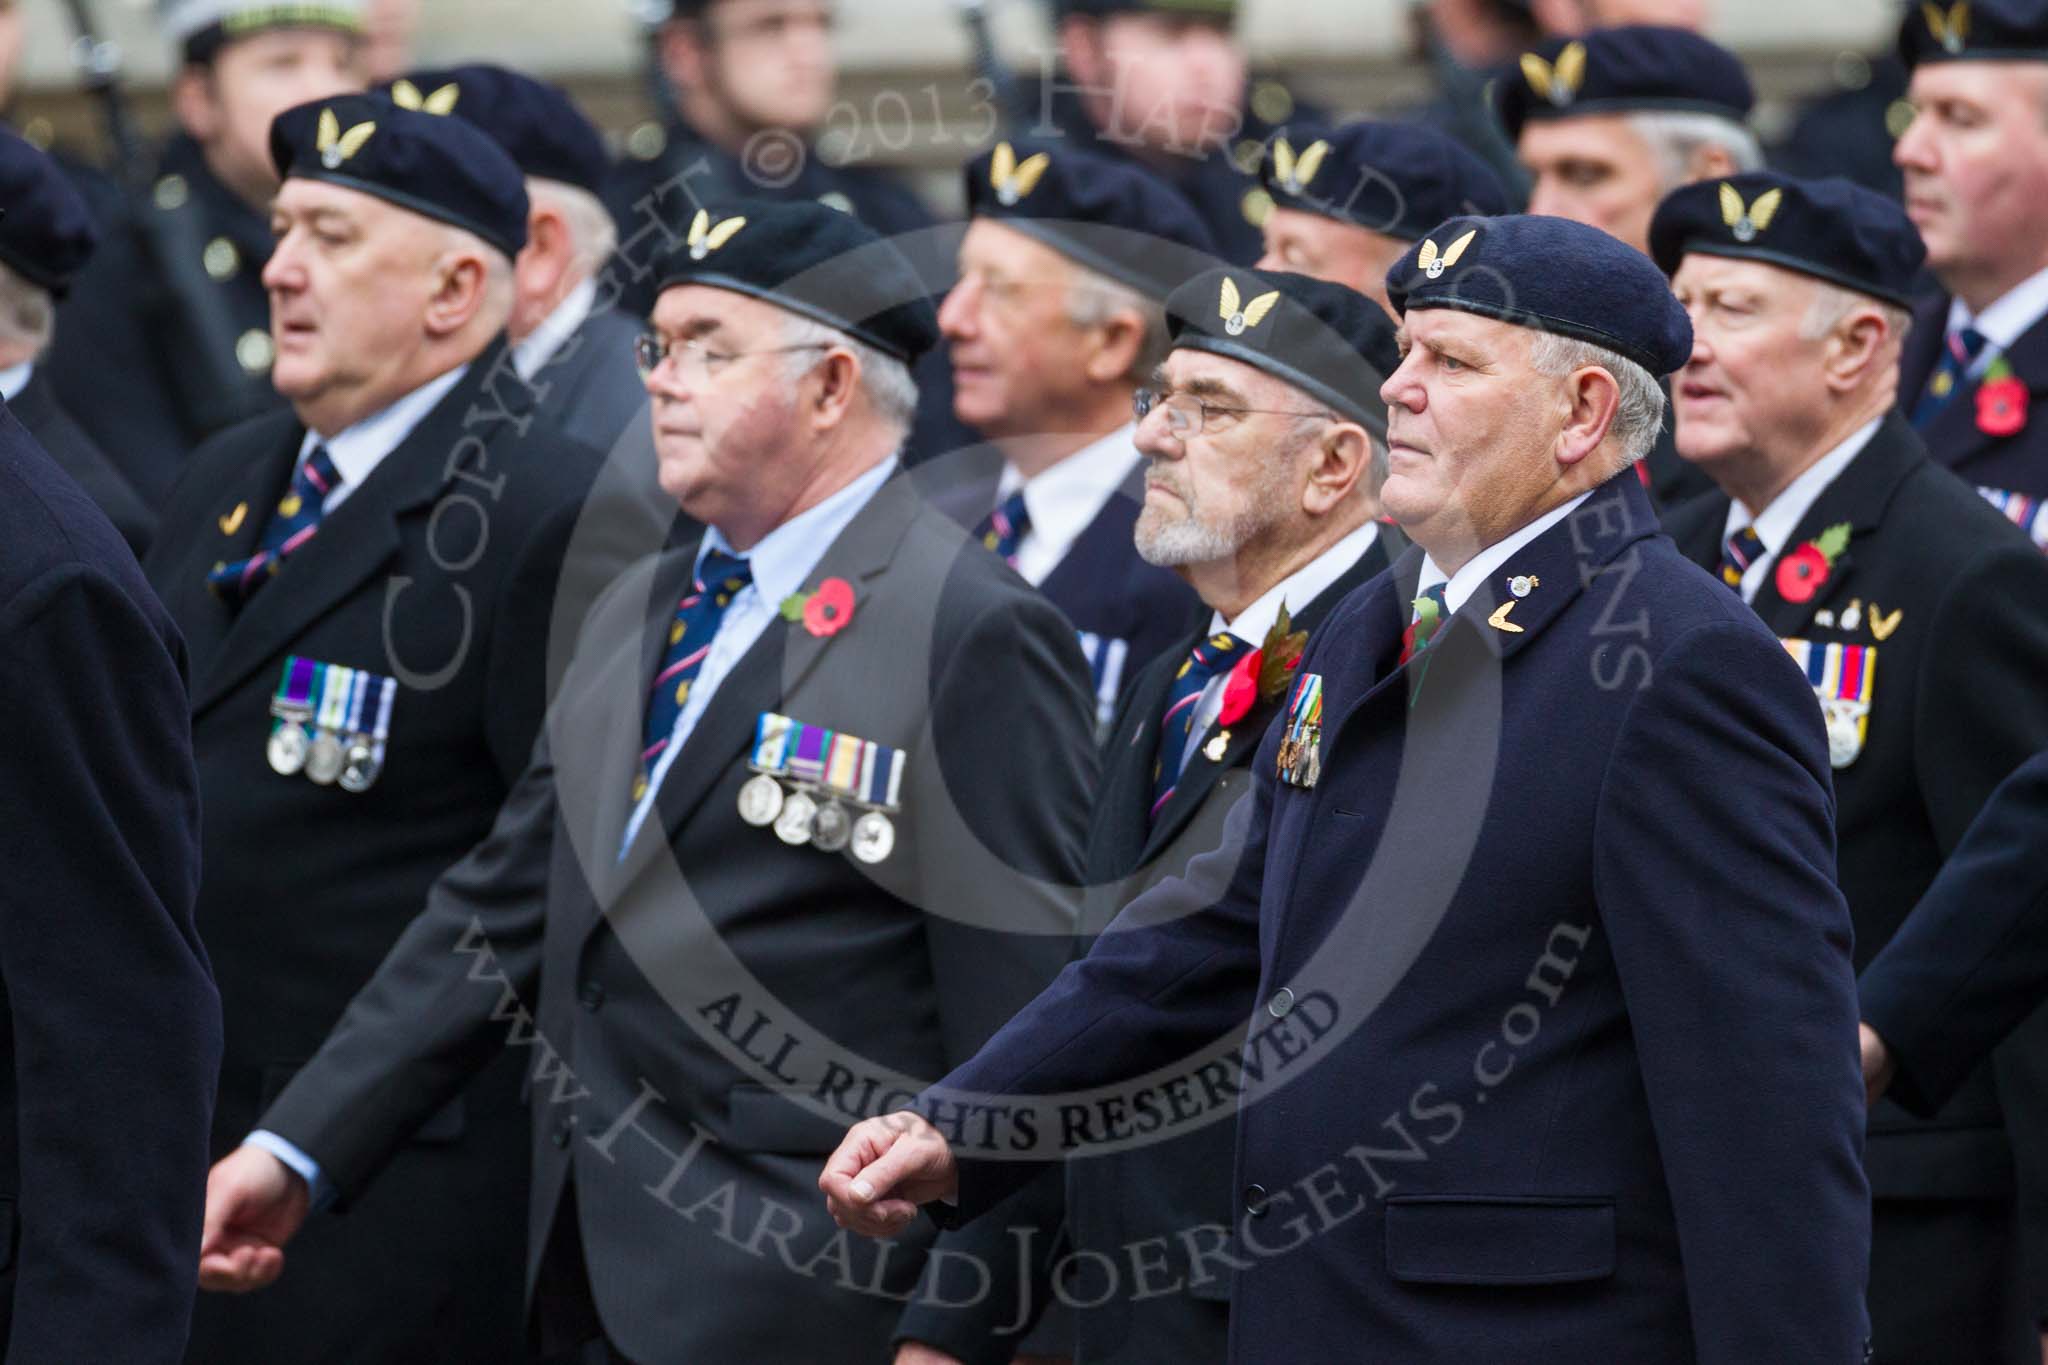 Remembrance Sunday at the Cenotaph 2015: Group E29, Aircrewmans Association.
Cenotaph, Whitehall, London SW1,
London,
Greater London,
United Kingdom,
on 08 November 2015 at 12:02, image #960